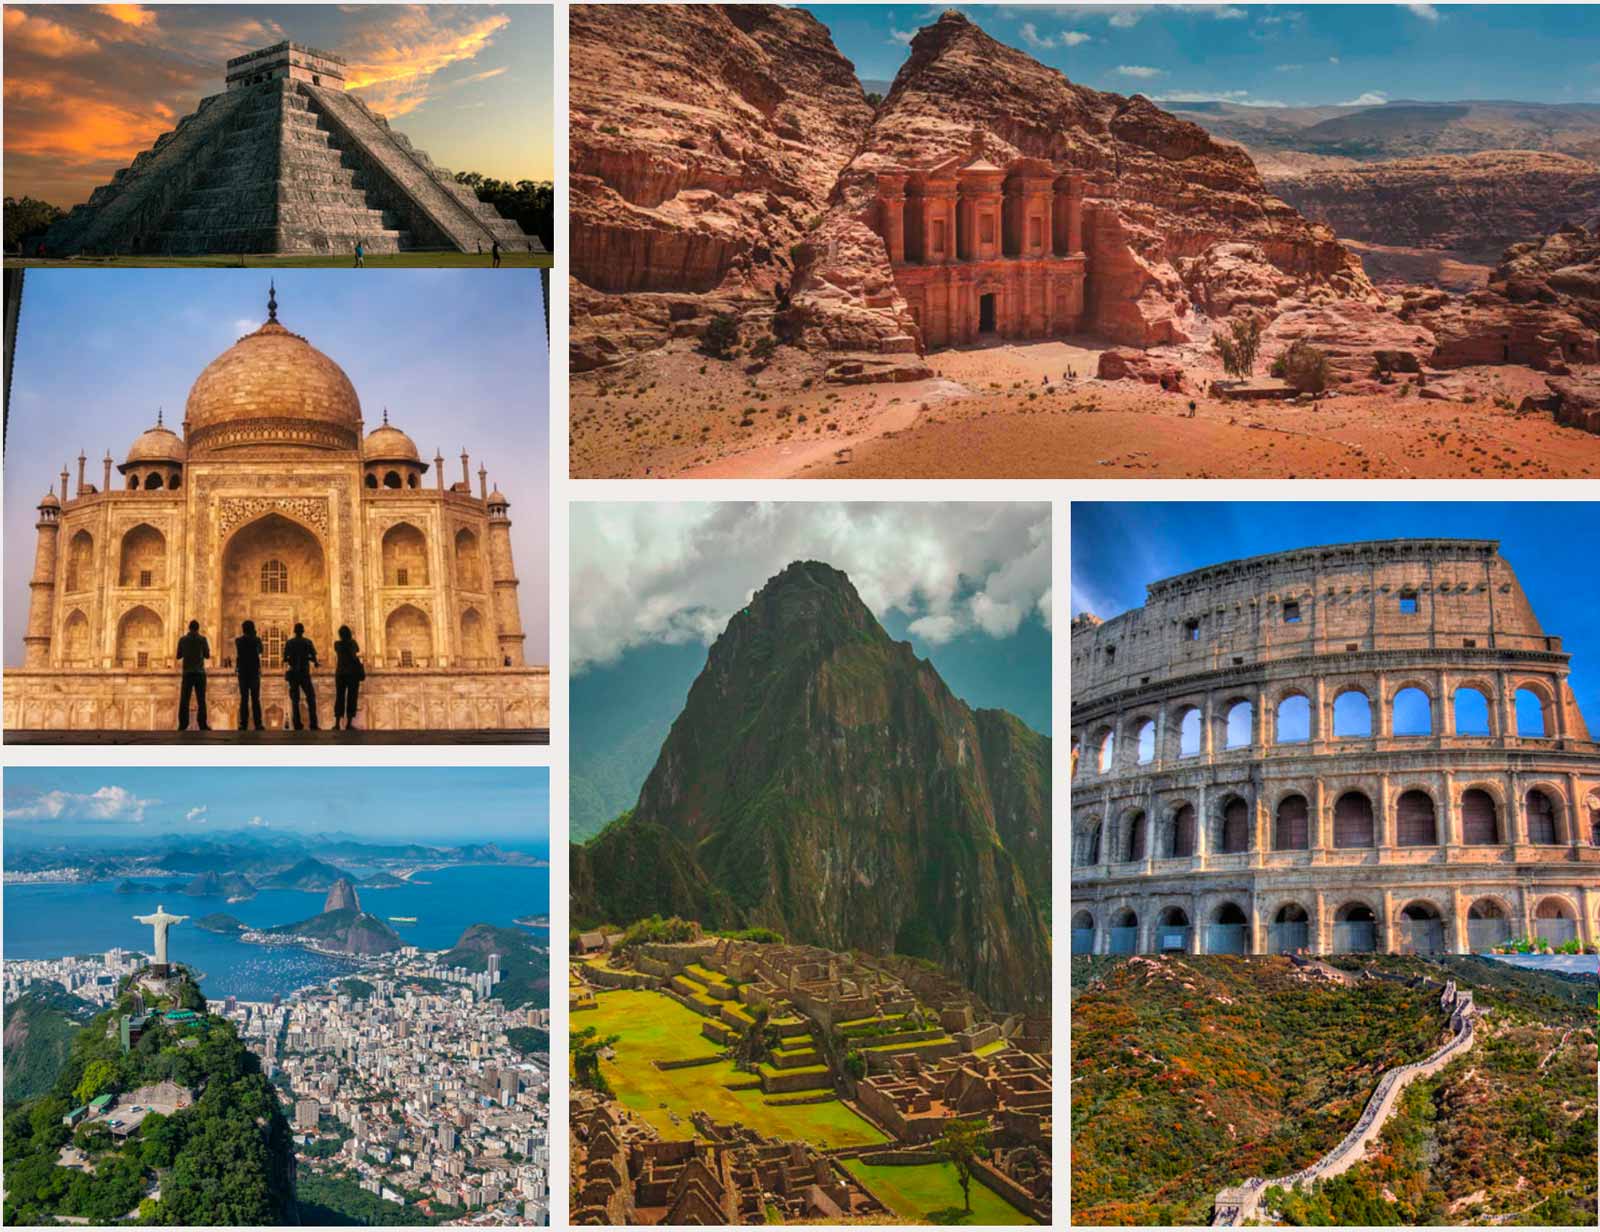 New 7 Wonders of the World